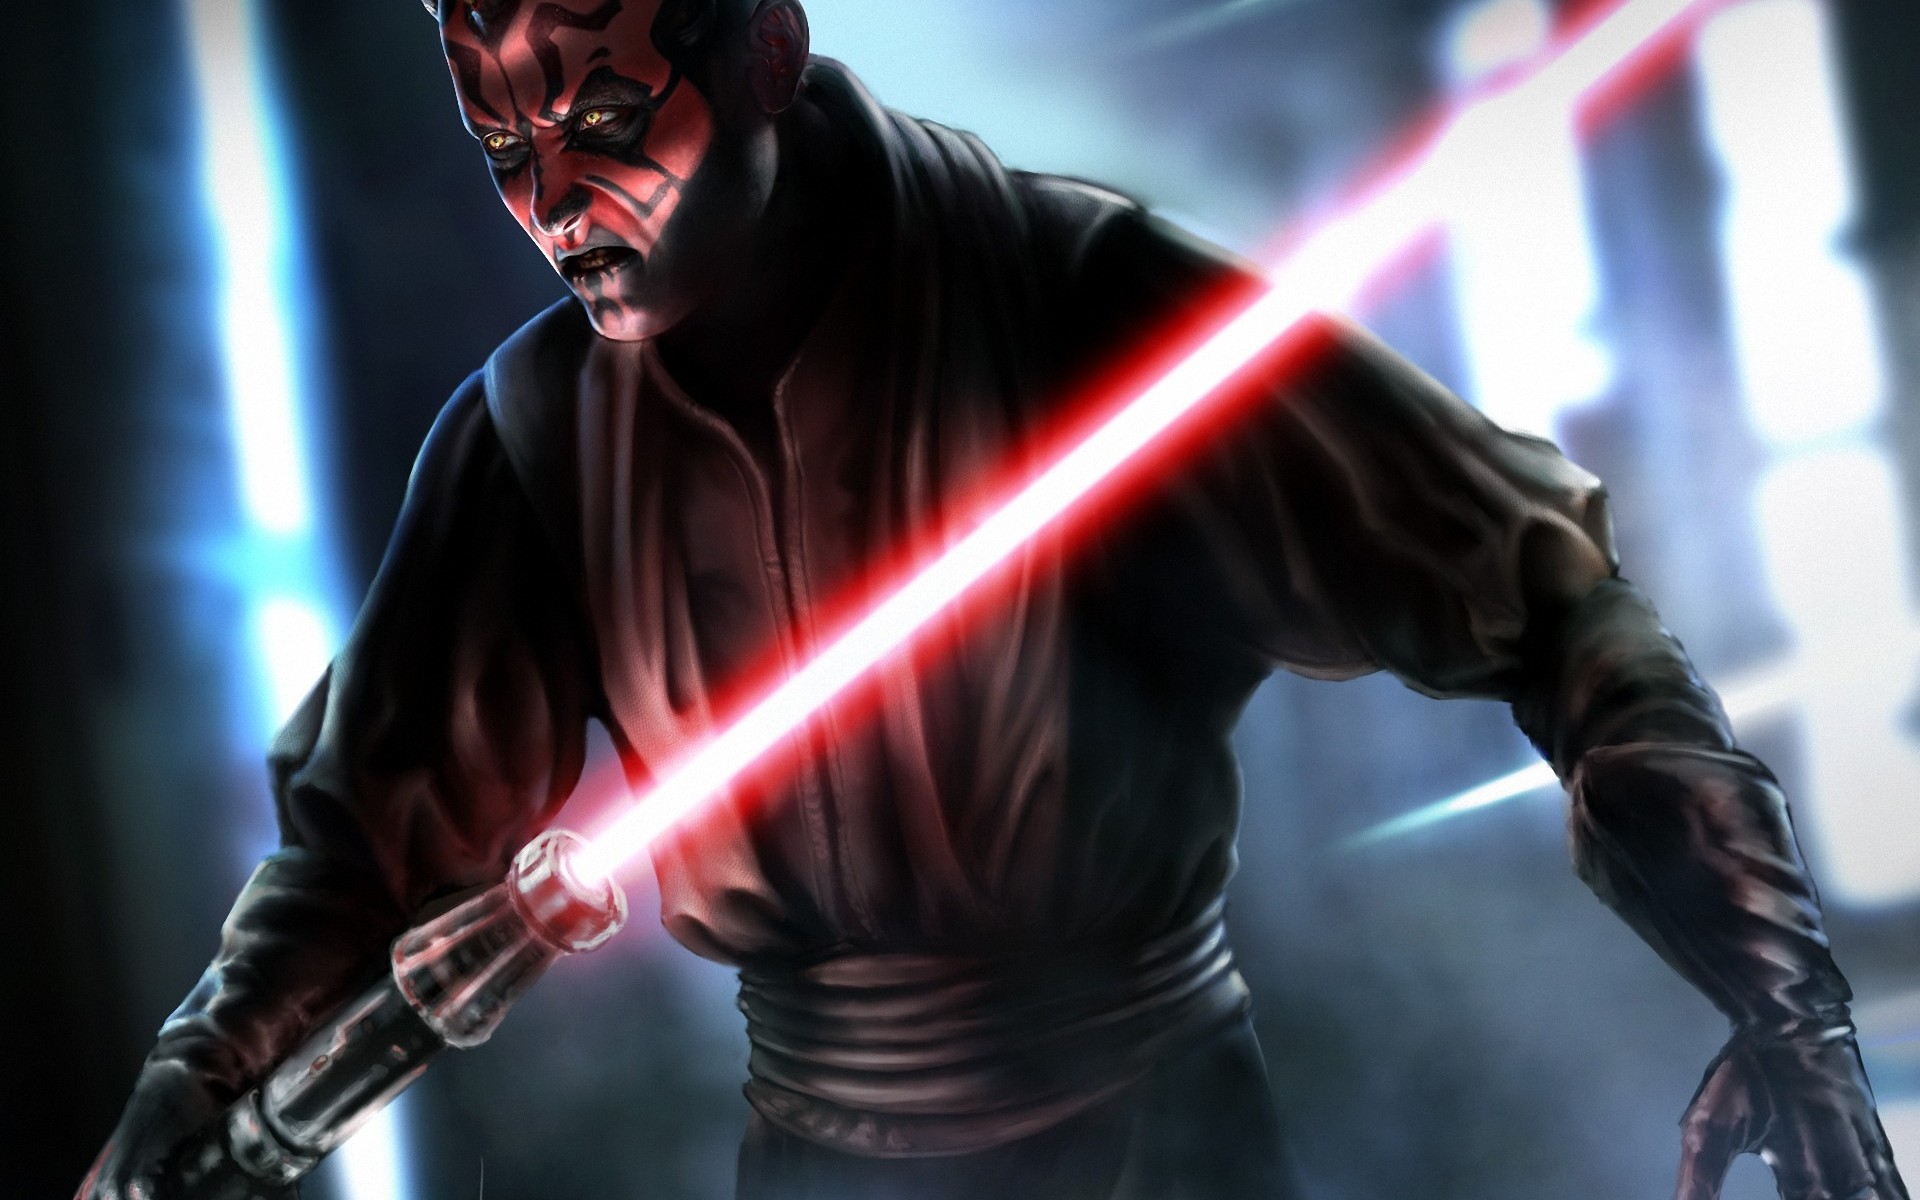 jedi wallpaper hd,action adventure game,fictional character,games,superhero,pc game